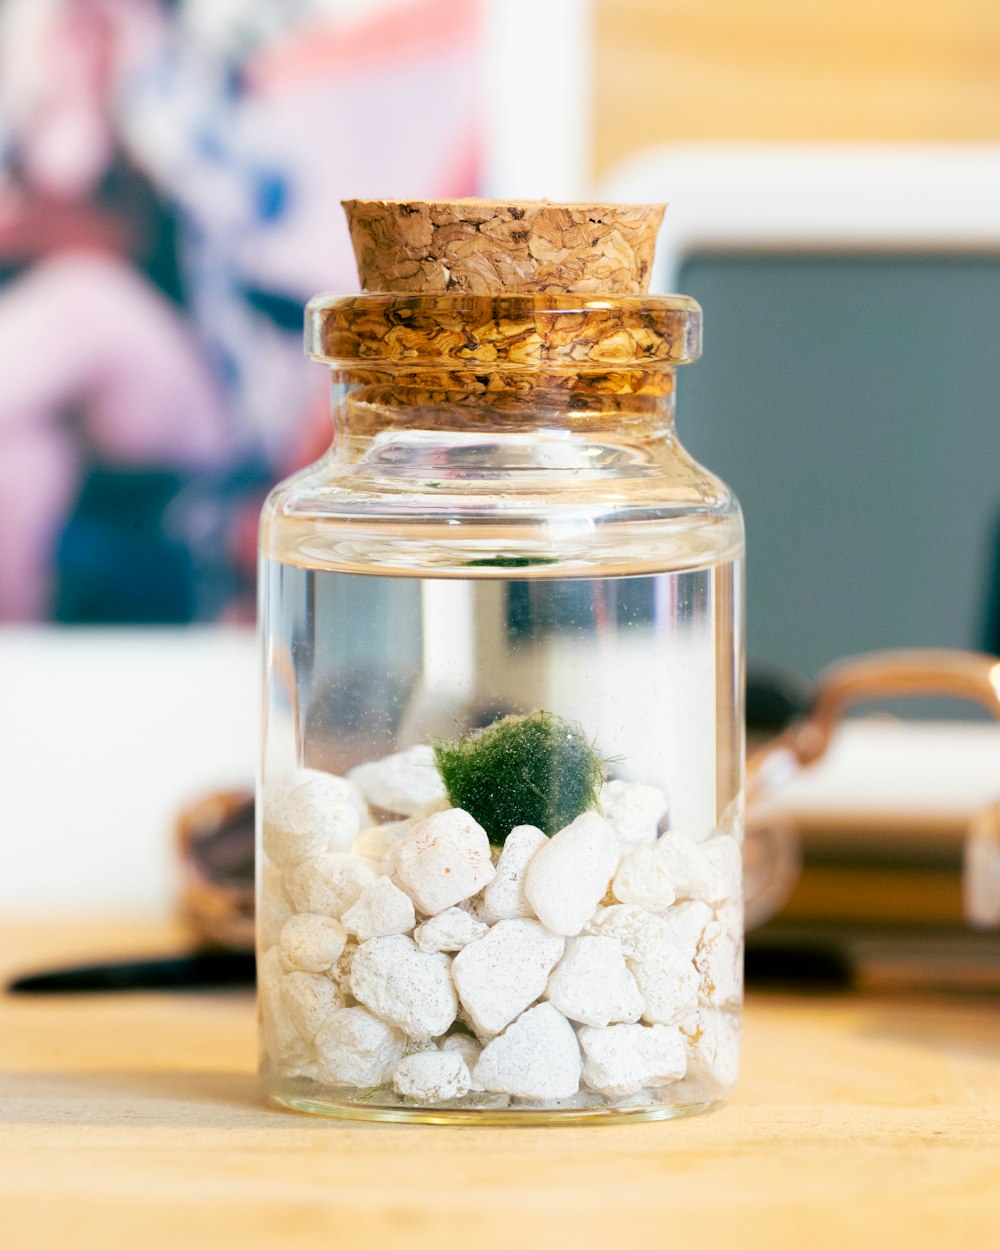 a glass jar filled with white and green rocks